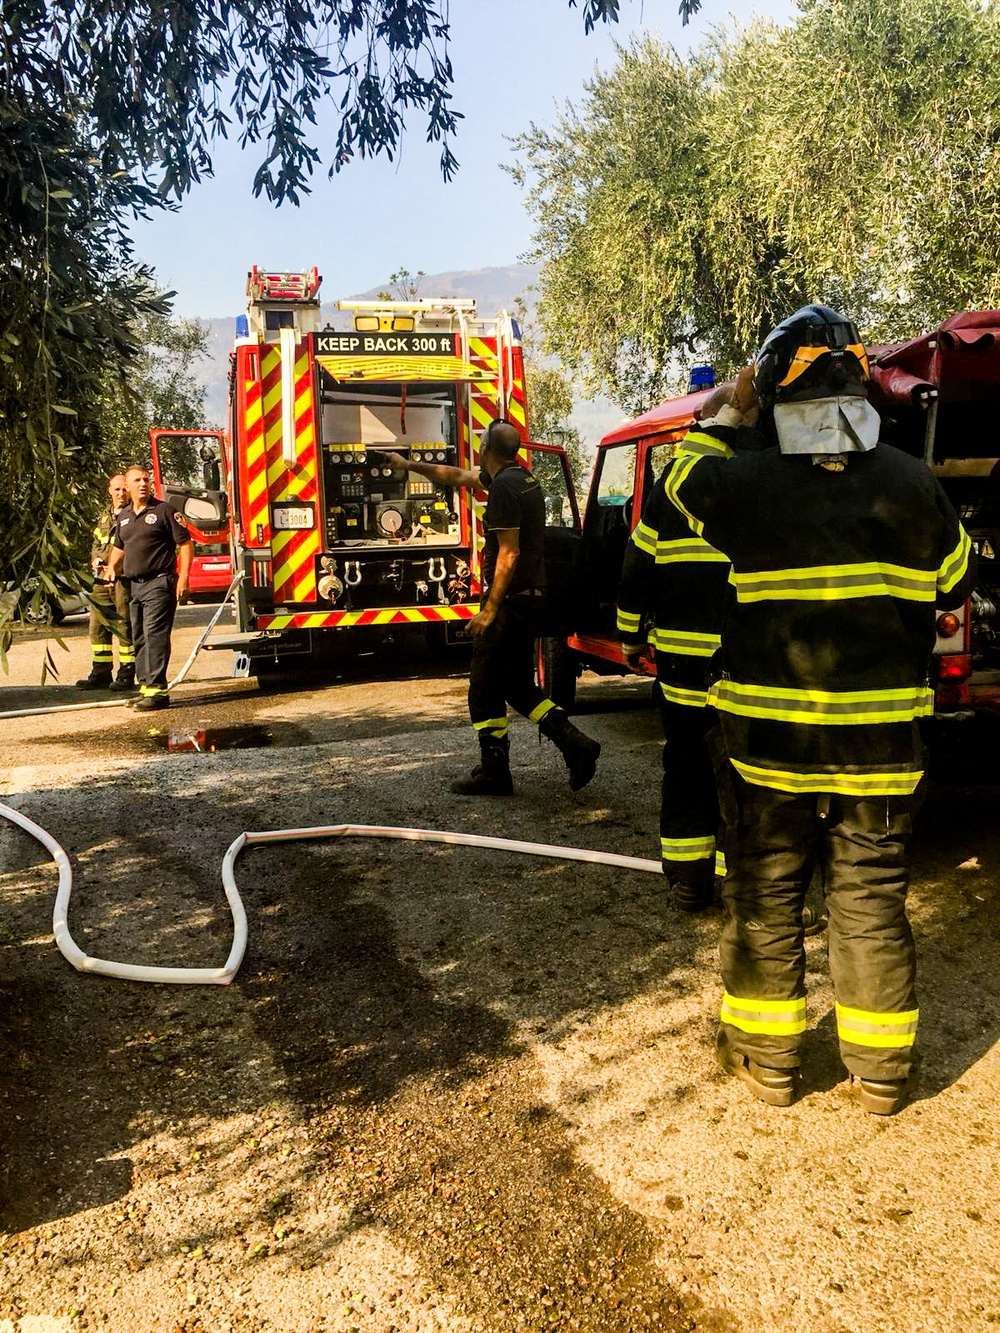 Camp Darby Firefighters Join Fight to Combat Massive Wildfire Near Pisa